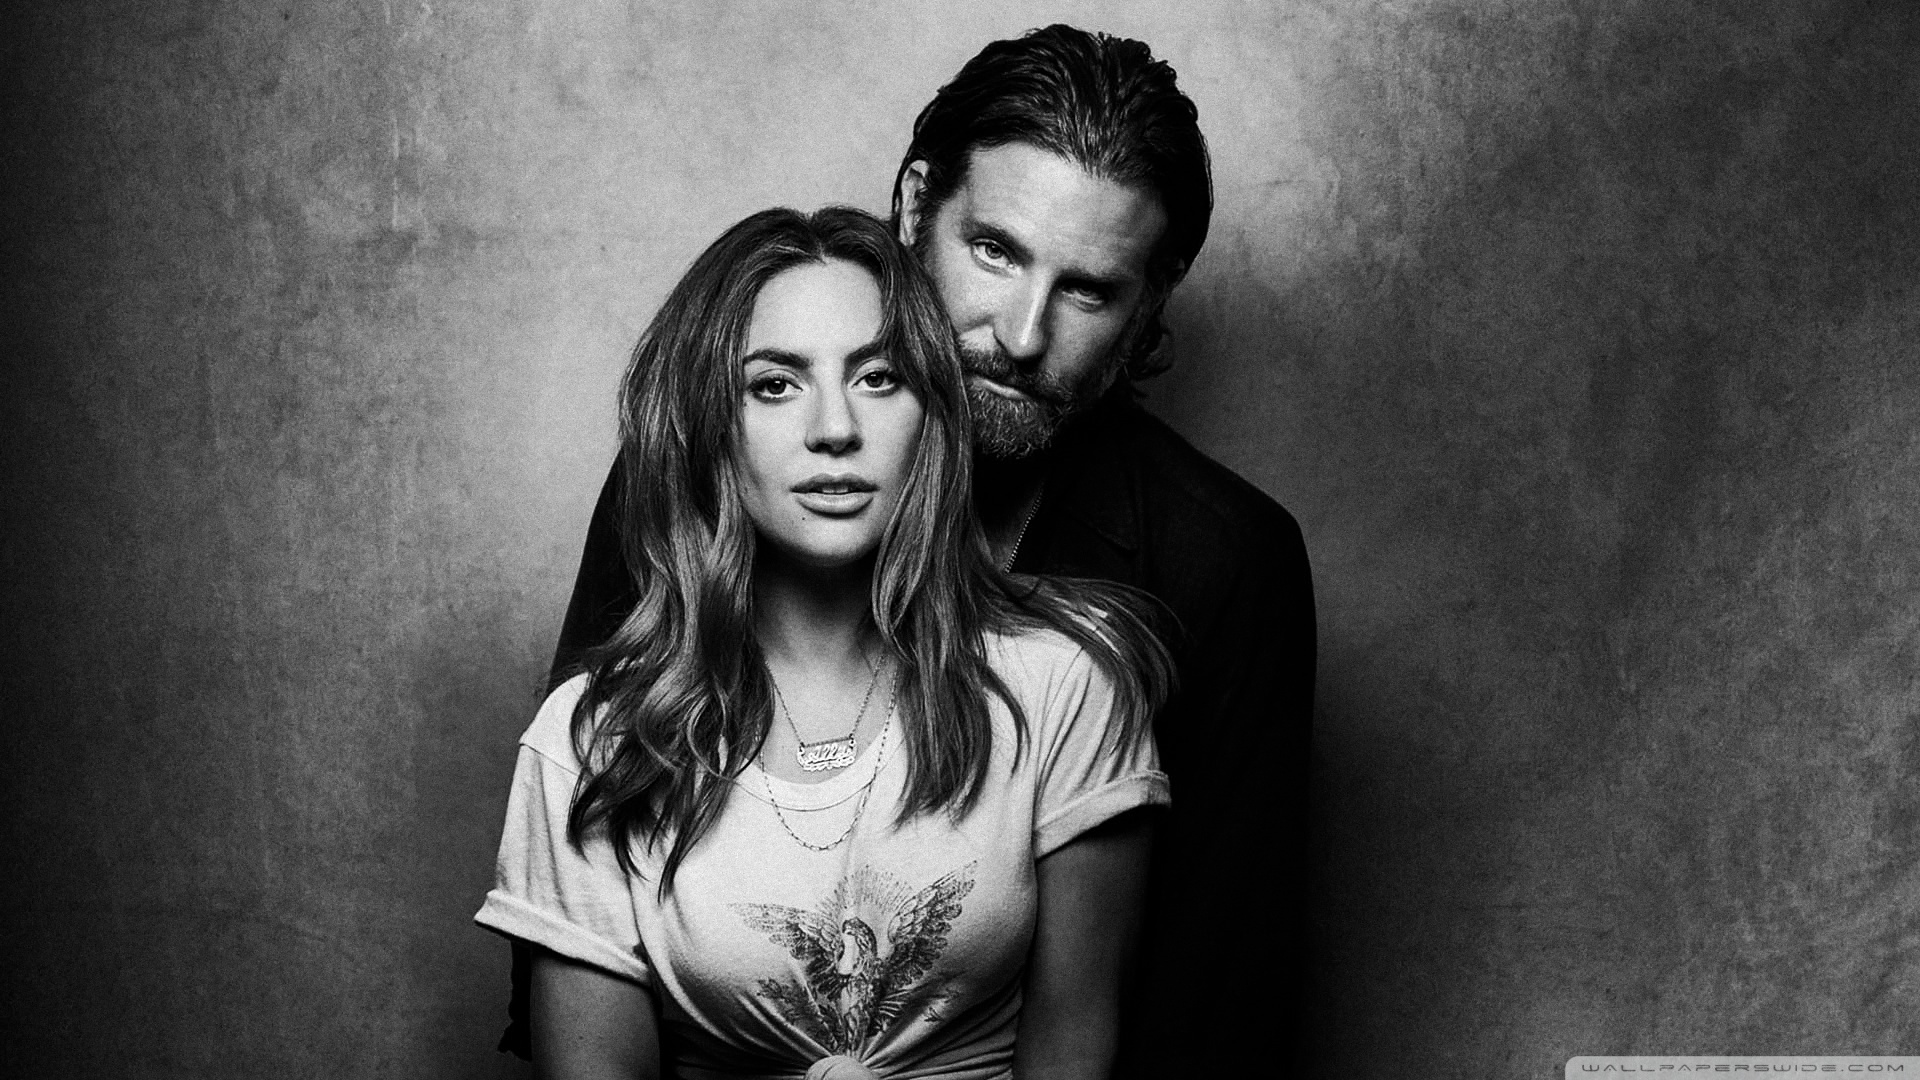 Download A Star is Born UltraHD Wallpaper - Wallpapers Printed